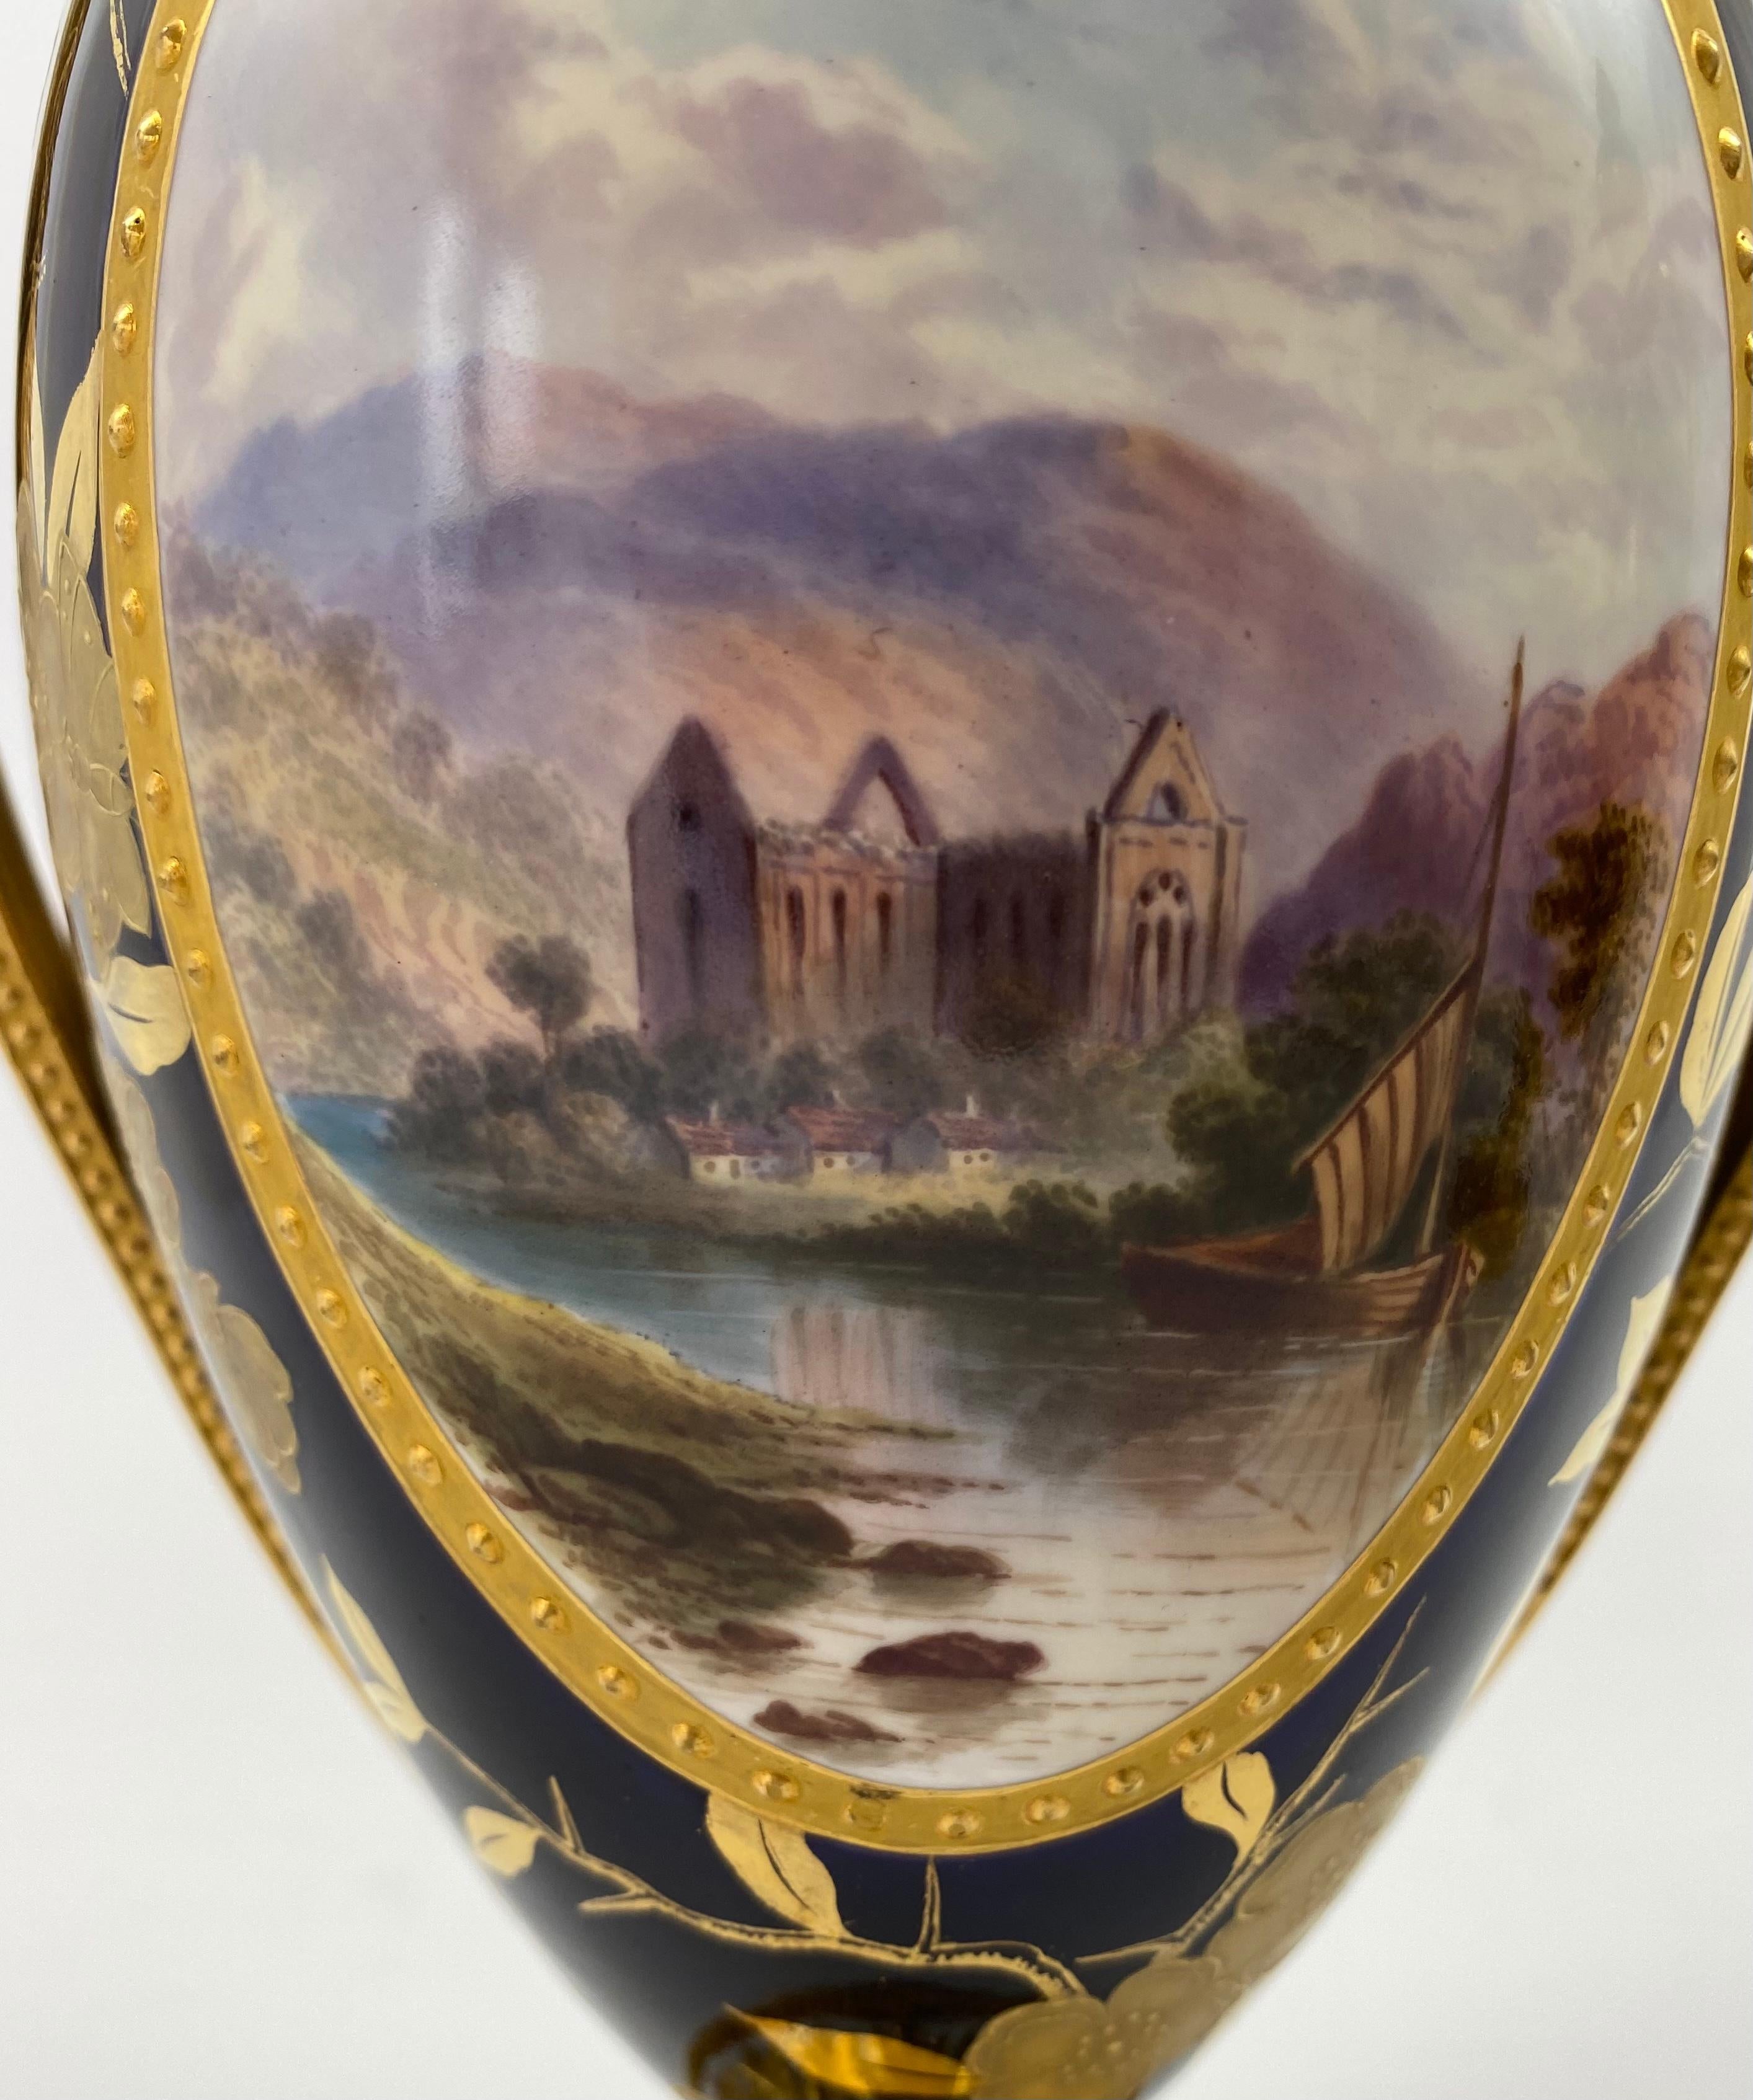 English Pair Davenport Porcelain Vases and Covers, c. 1875